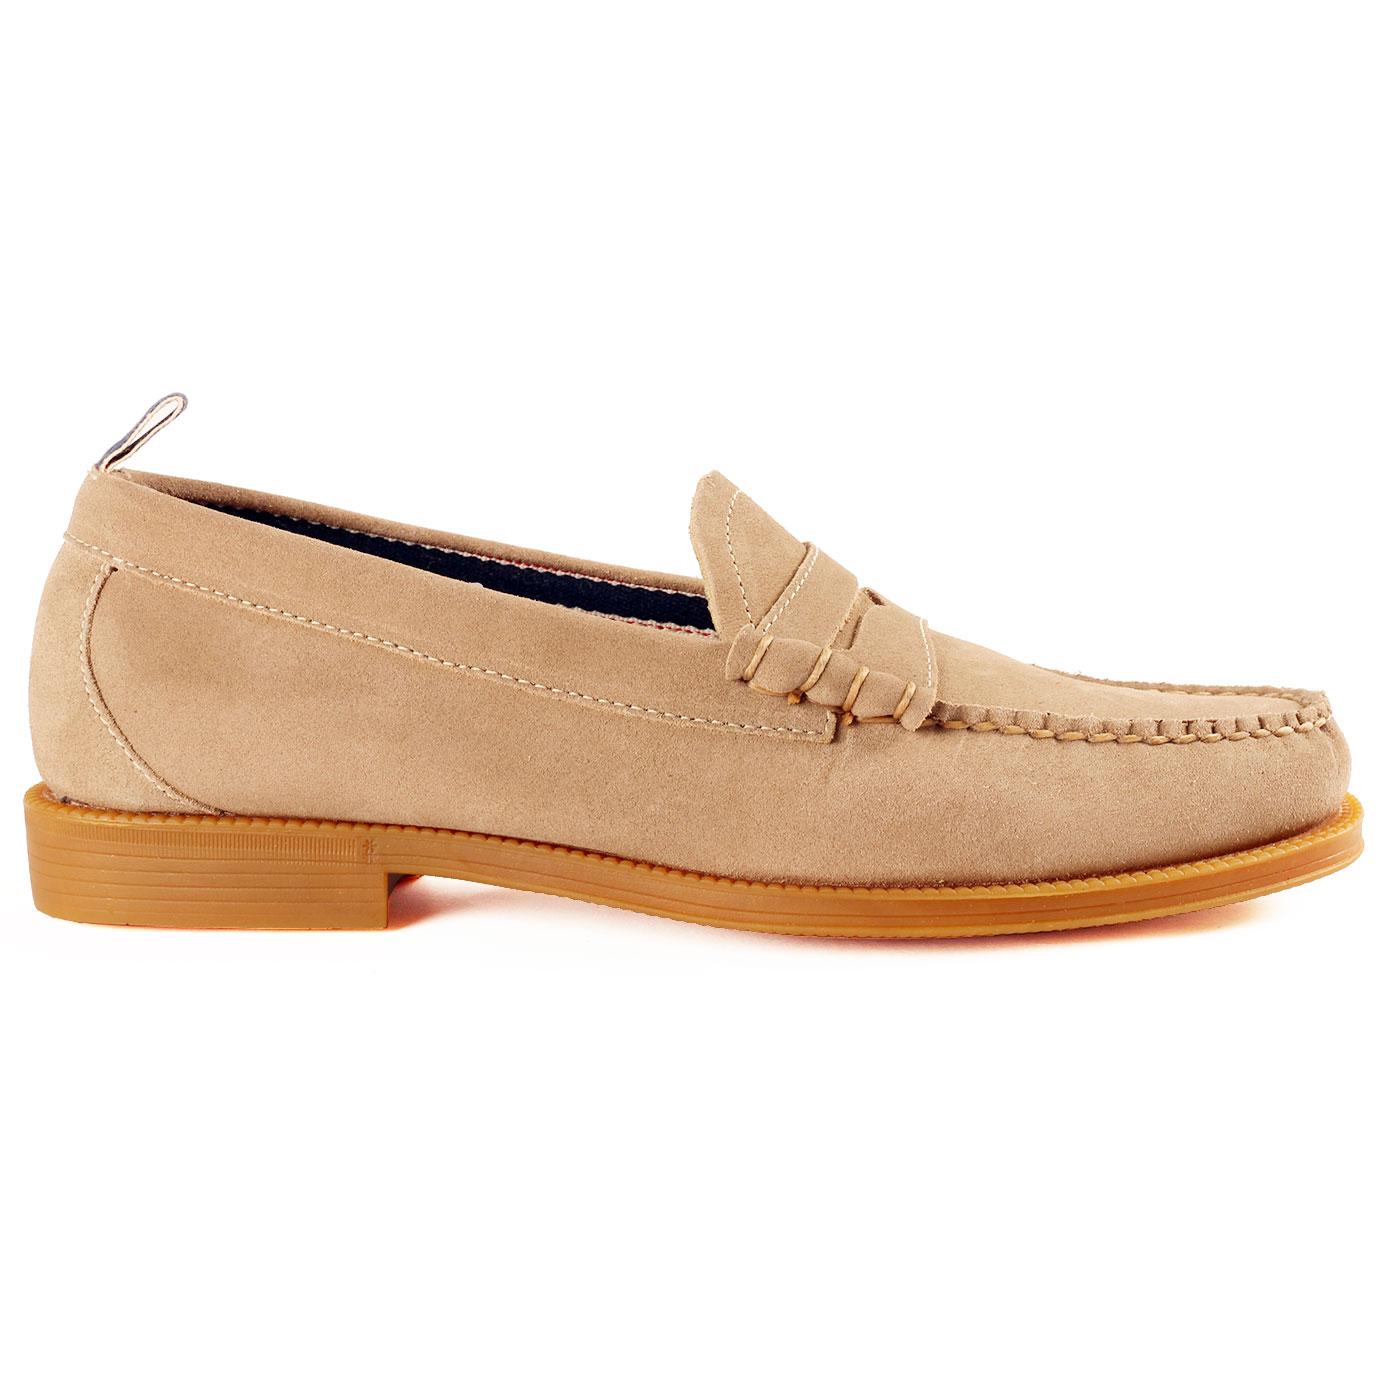 Larson Suede BASS WEEJUNS Retro Penny Loafers (E)